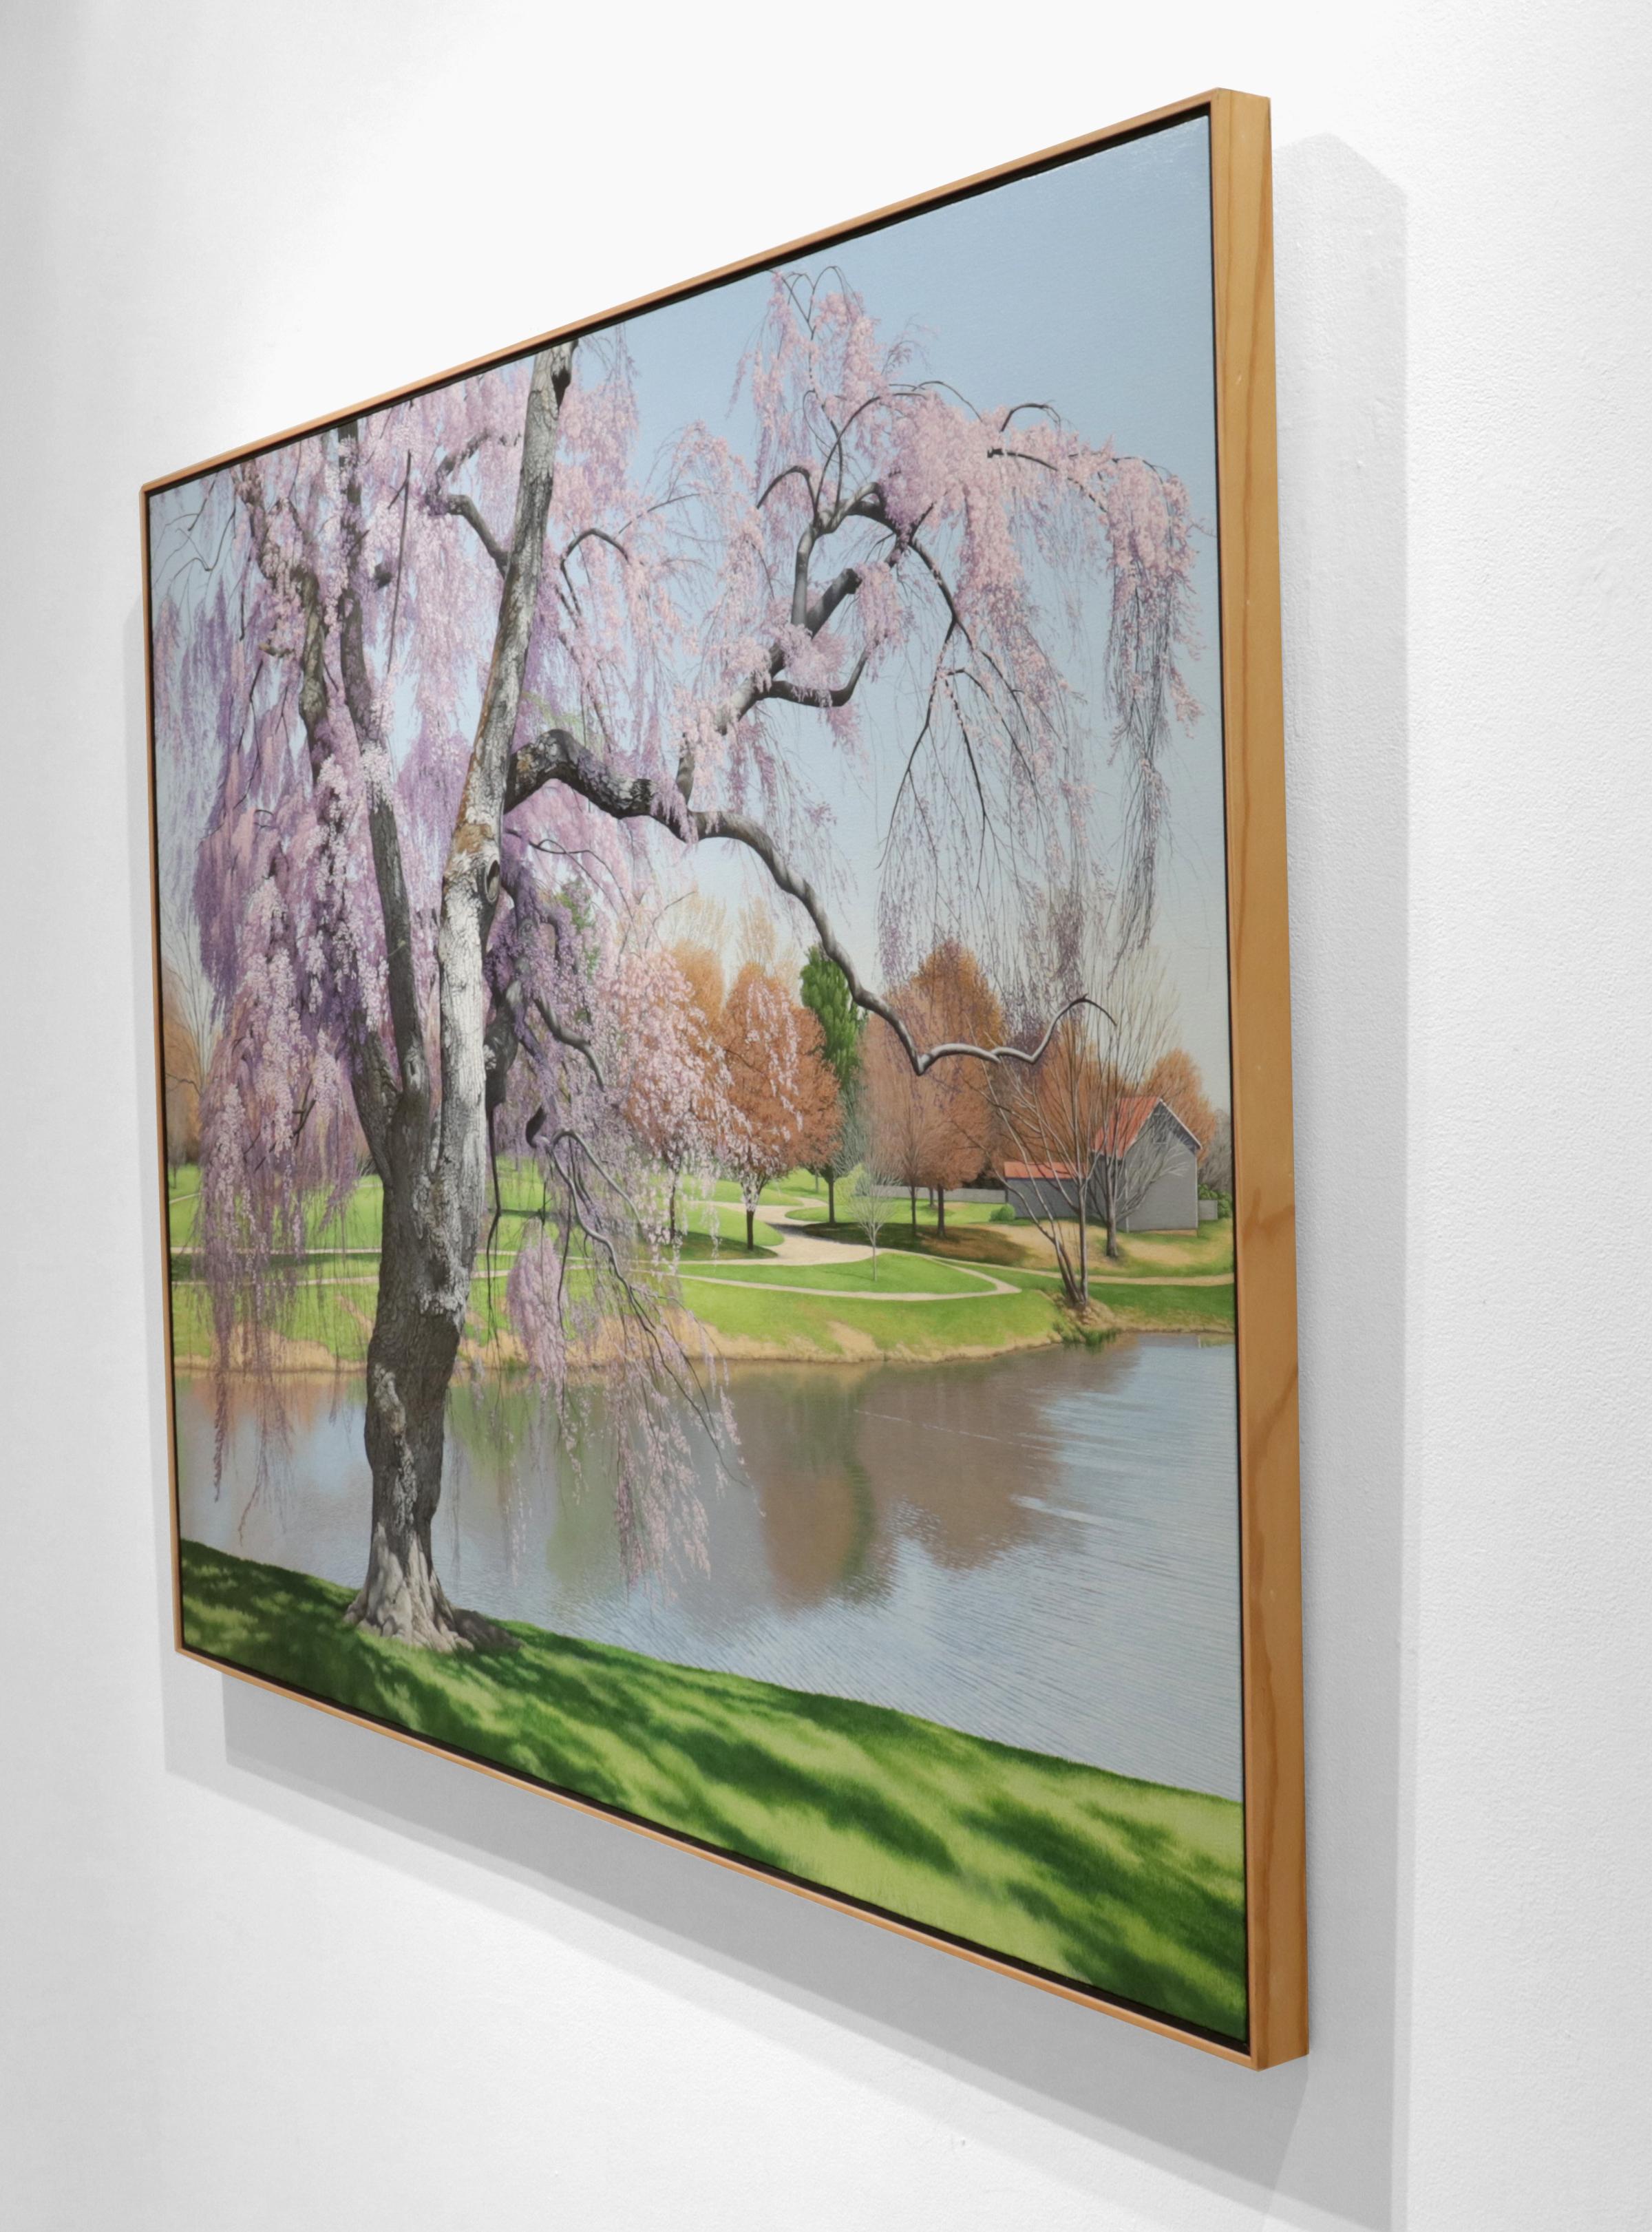 Original Landscape painting by New Jersey artist Anita Mazzucca. A lavender willow tree stands before a pond and green hills with a blue sky. Mazzucca is a highly coveted artist known for her meticulous brushwork.